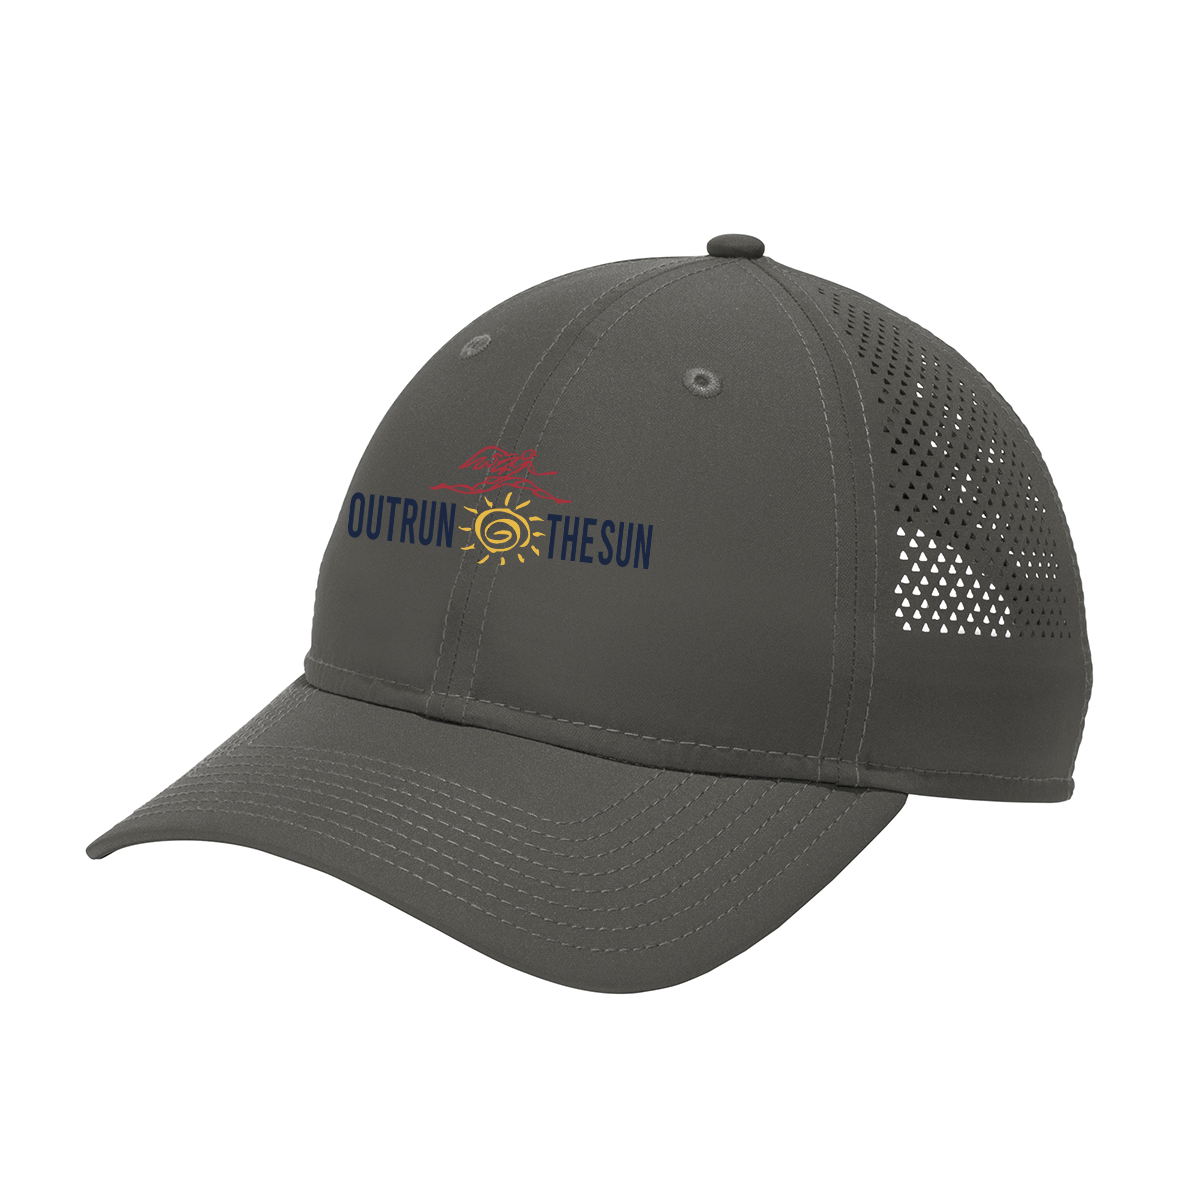 Outrun the Sun New Era® Perforated Performance Cap (UPF 50+)